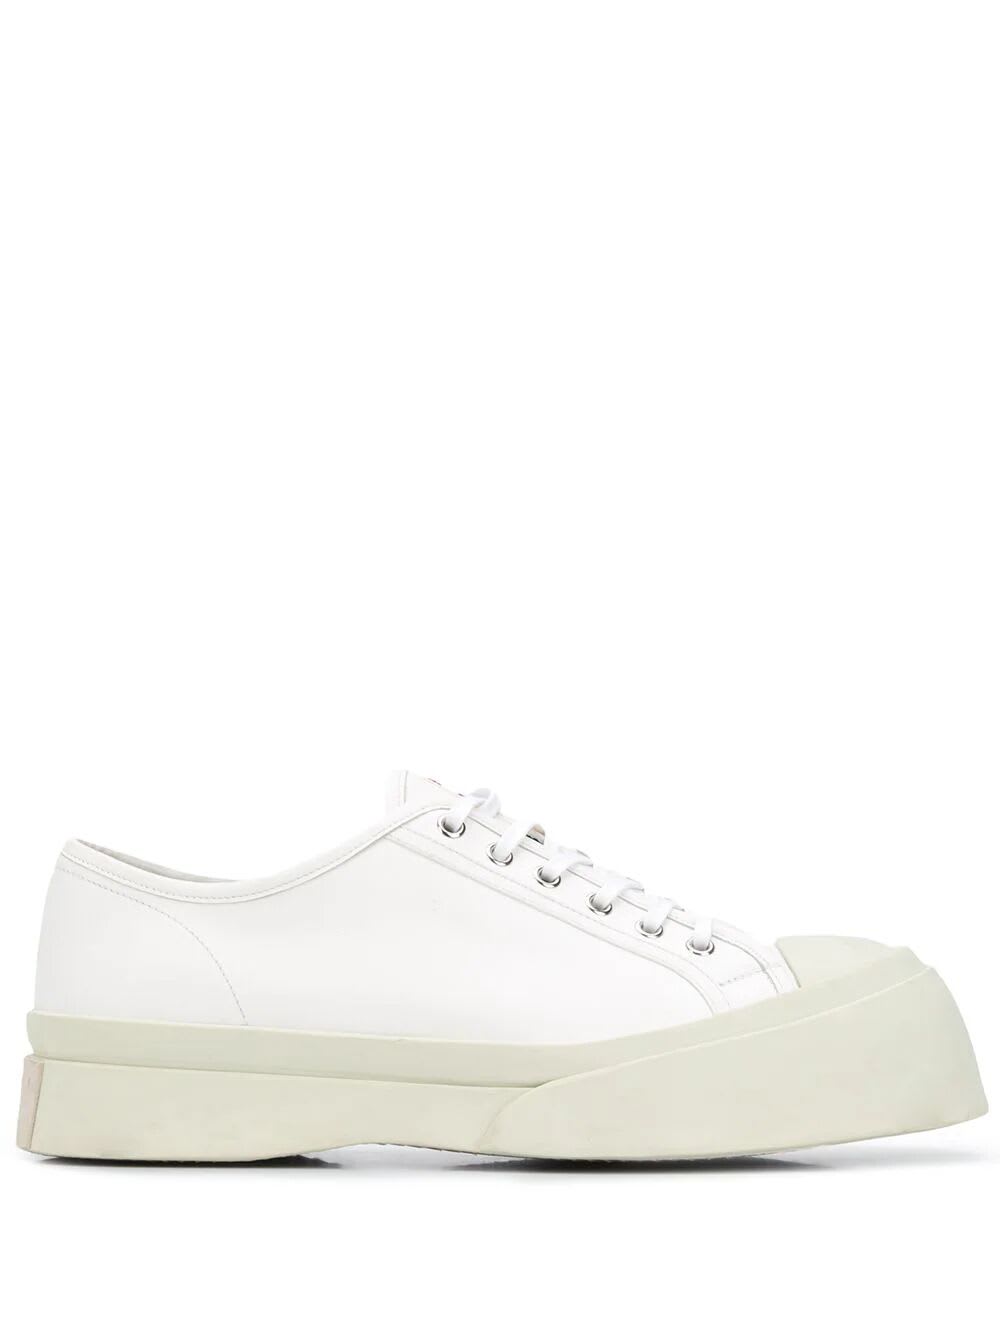 Shop Marni Lace Up Sneakers In Lily White